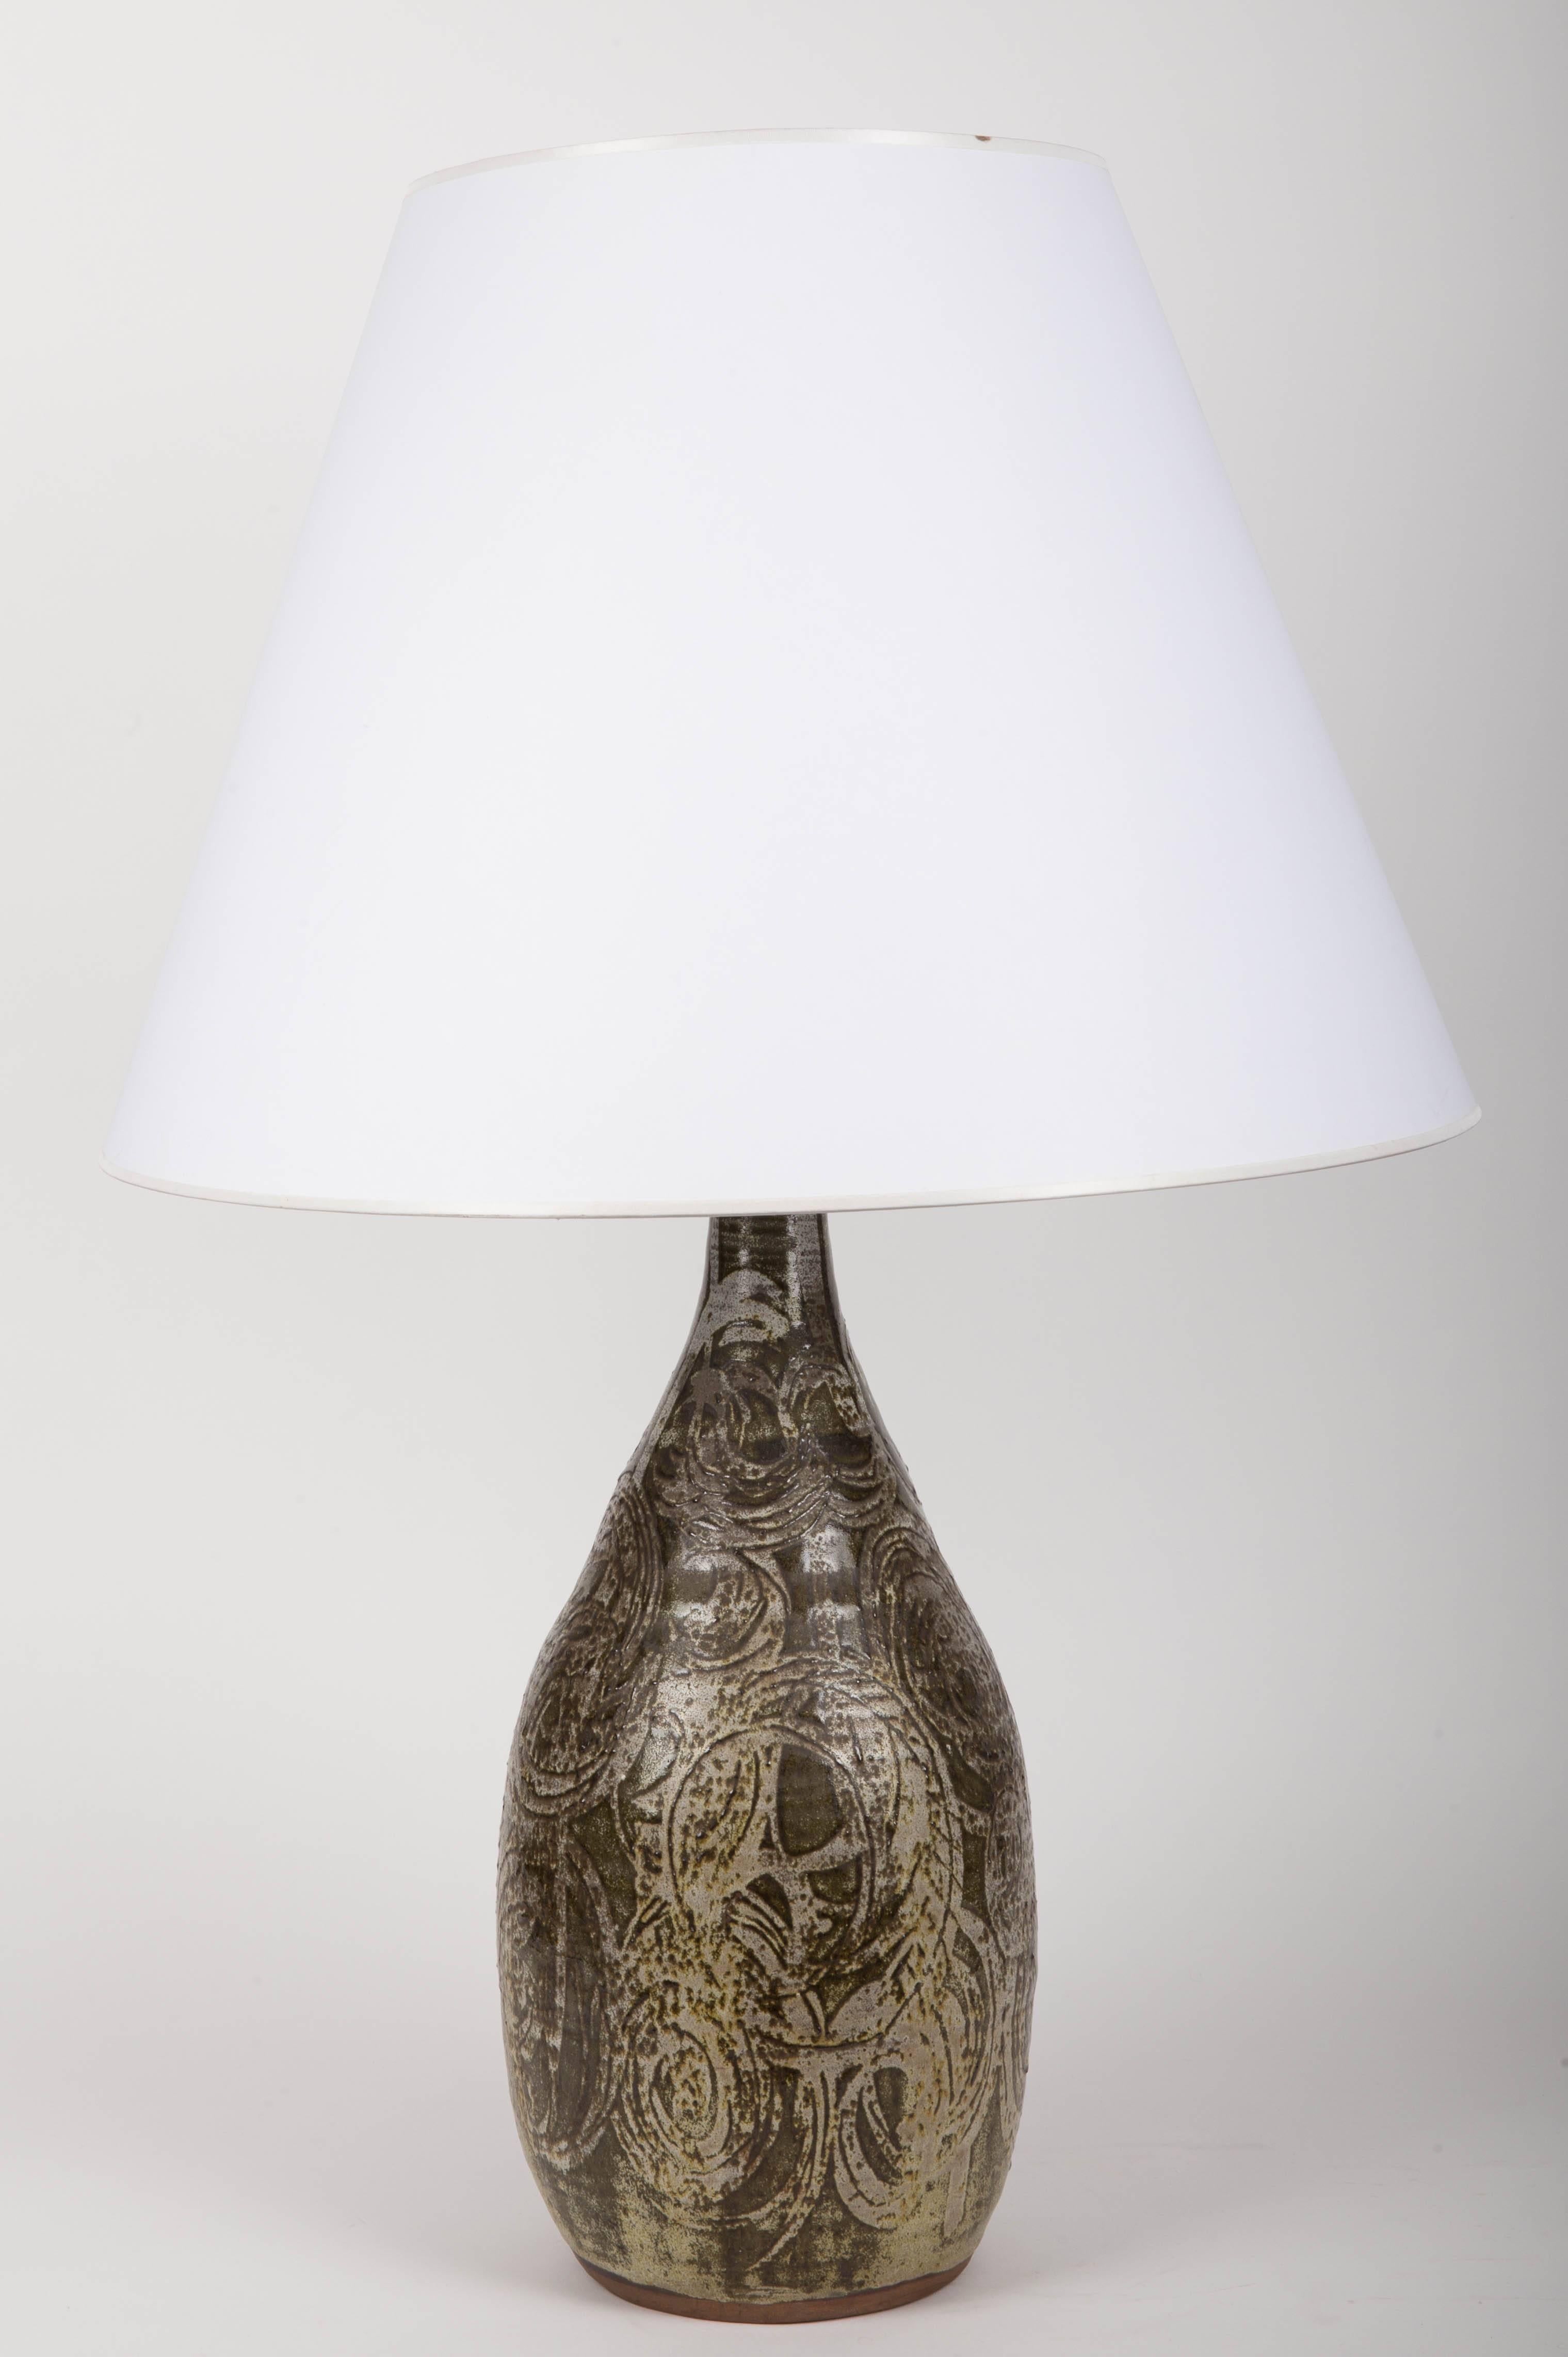 Gray and green table lamp.